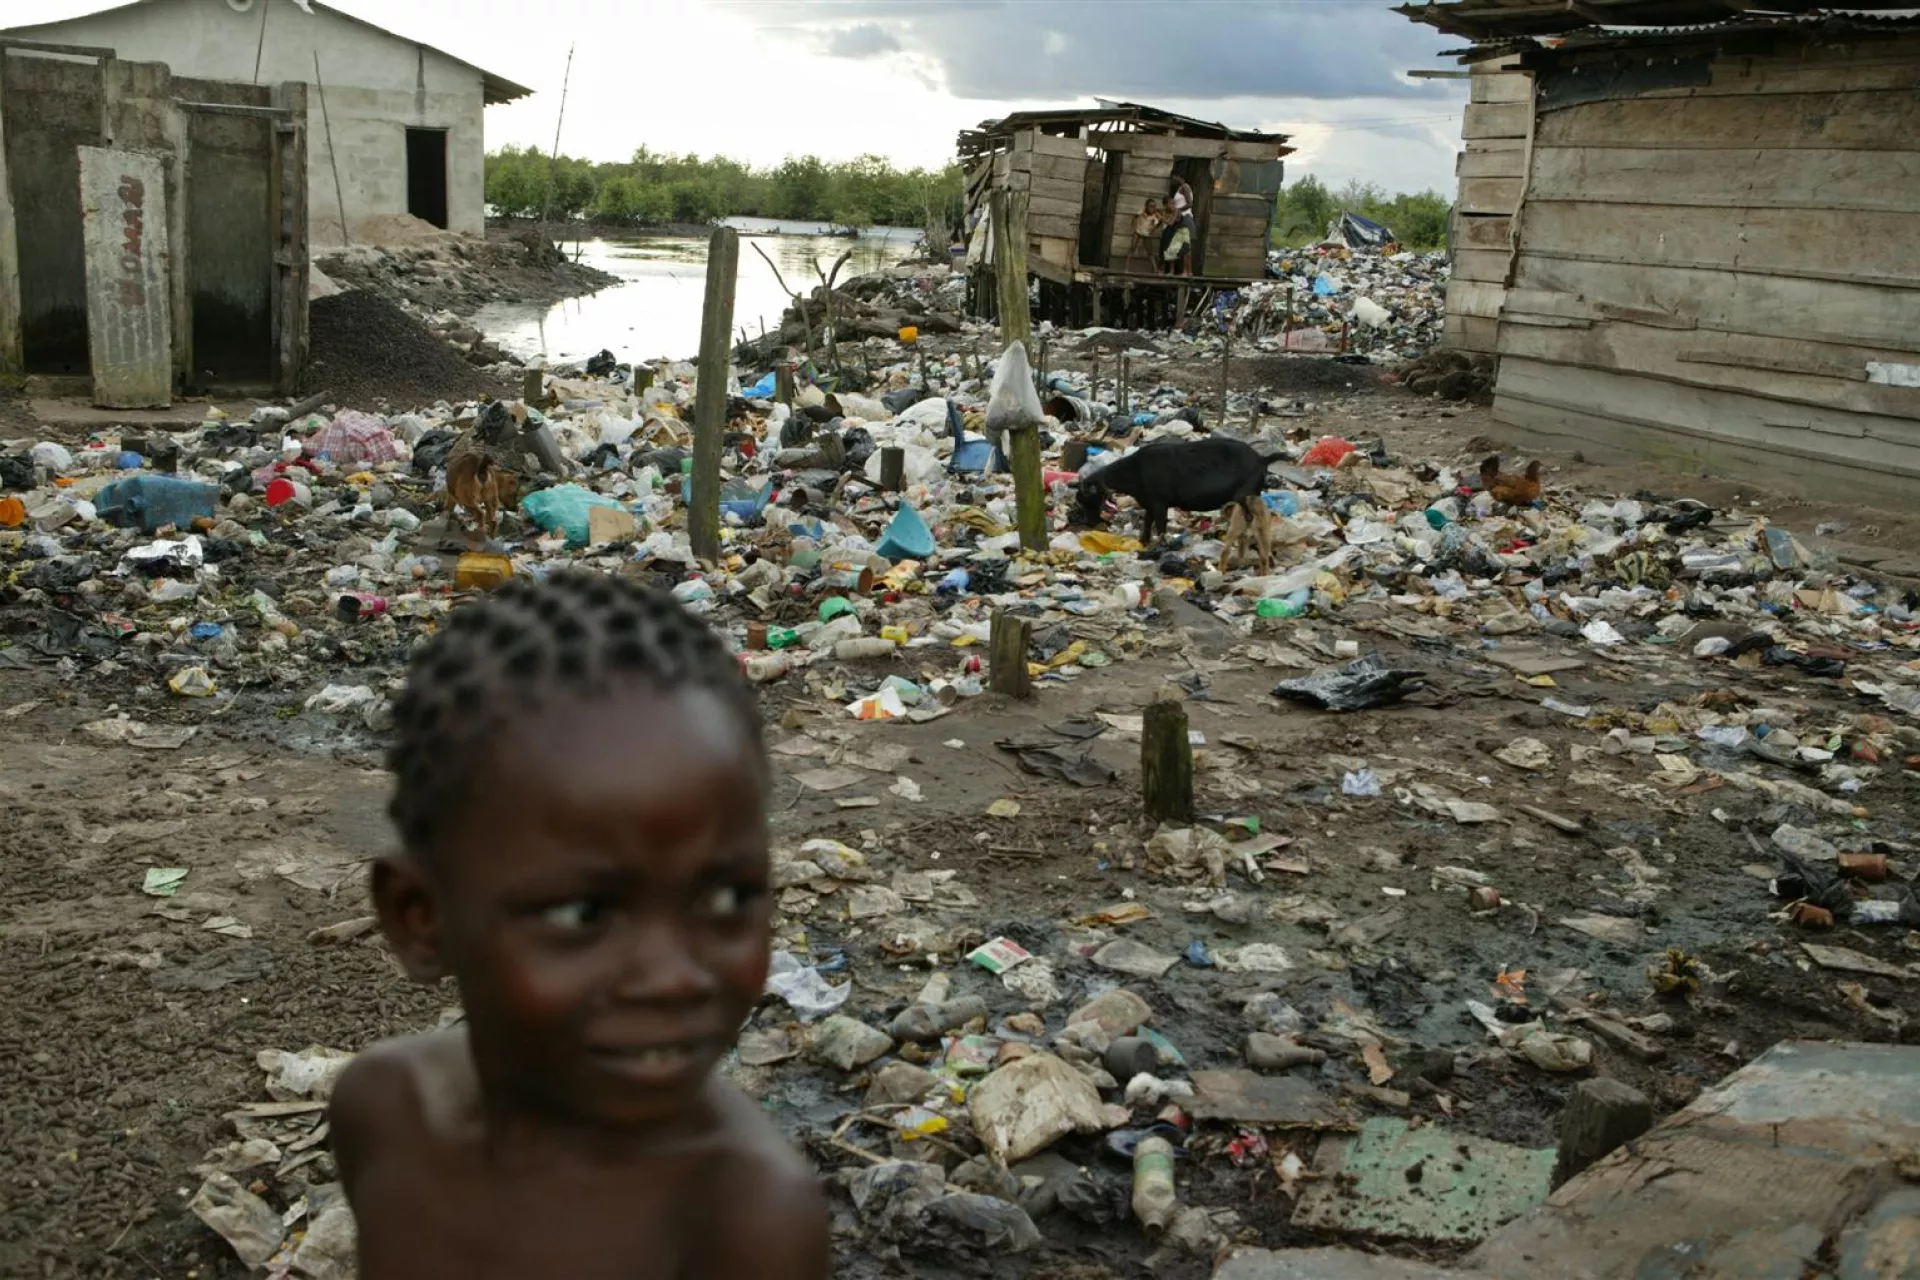 a girl stands amid garbage, mud and human waste in an impoverished waterside community